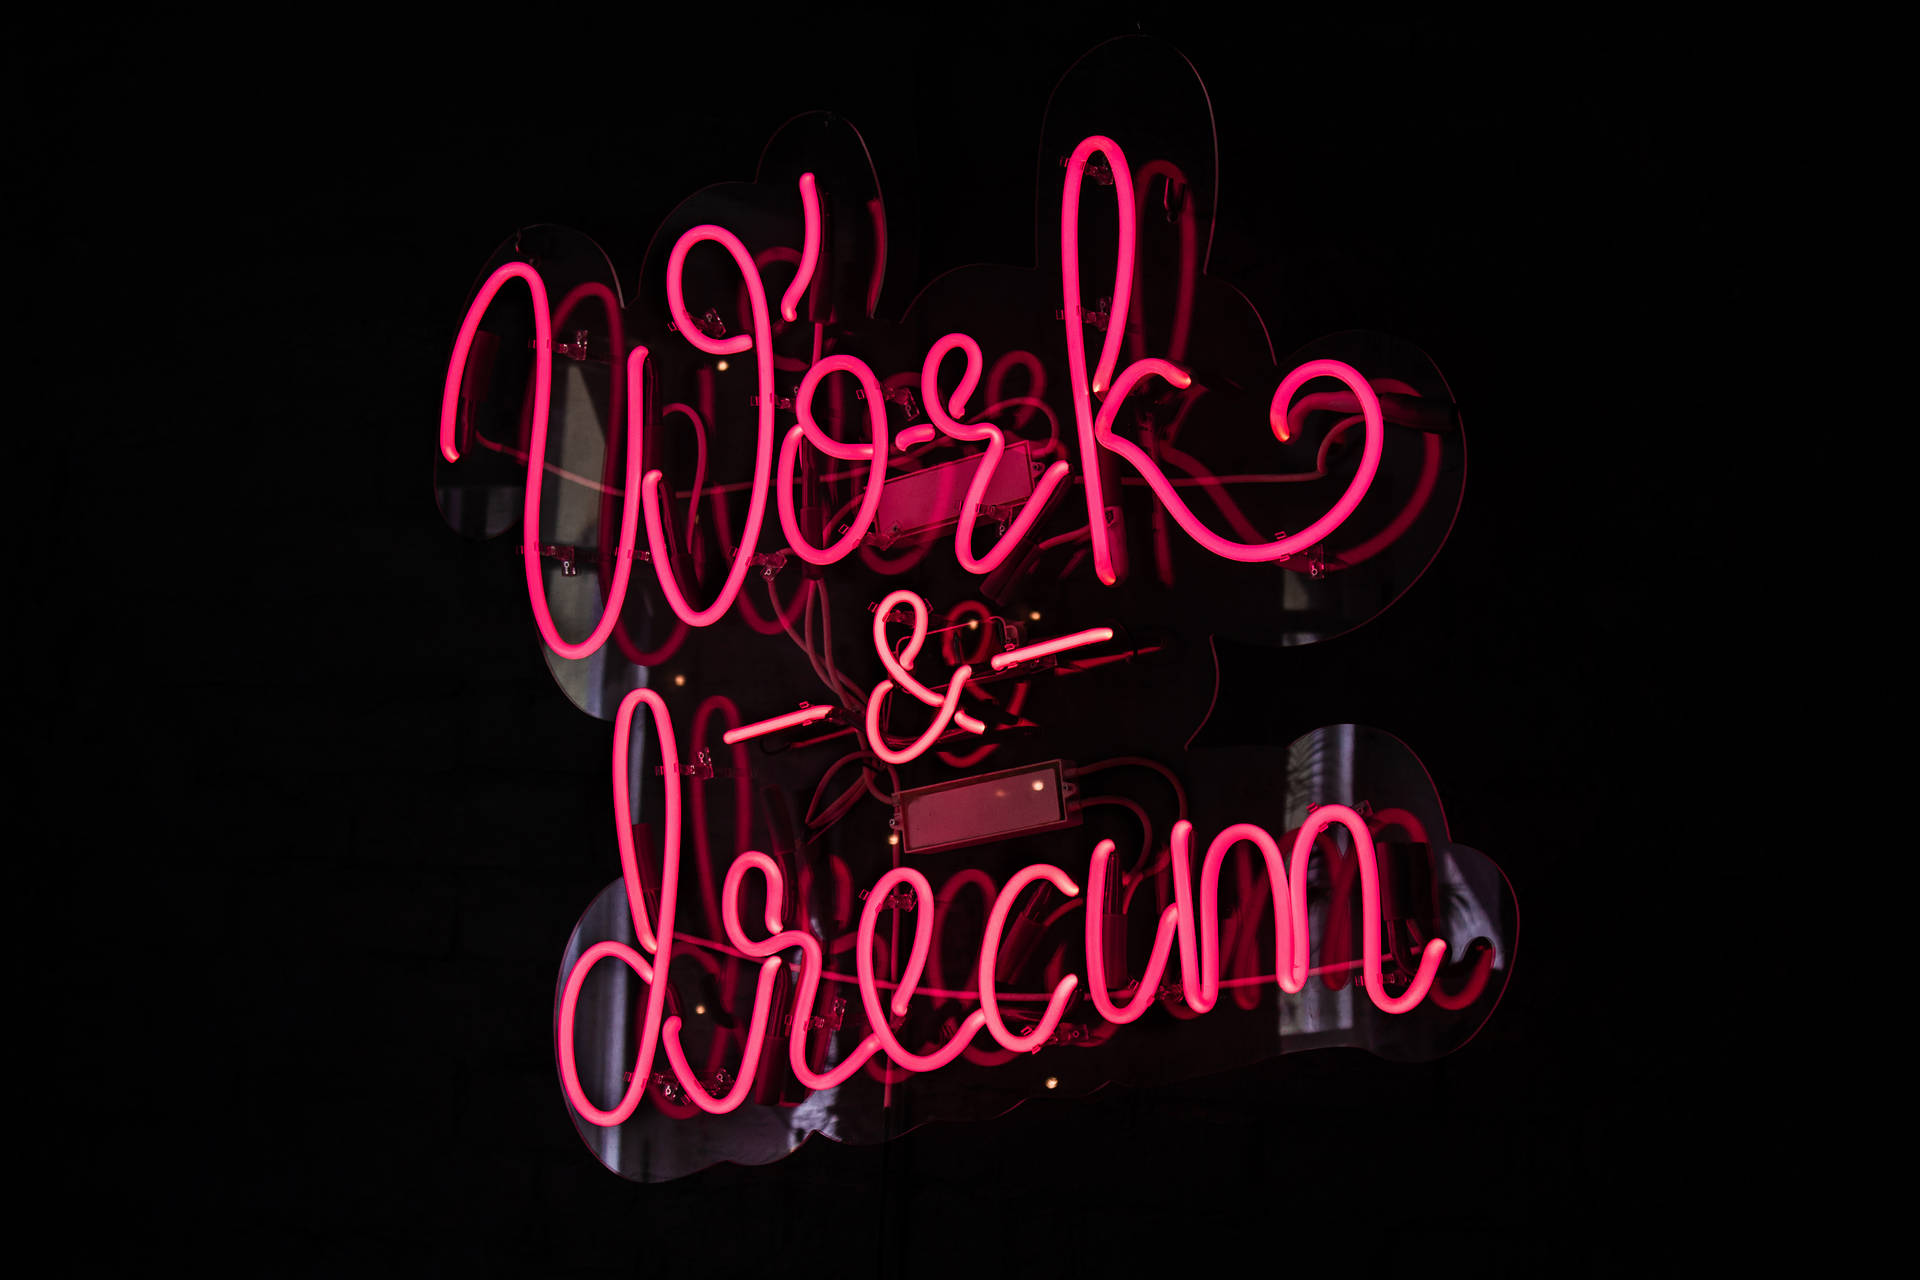 Cool Neon Work And Dream Lights